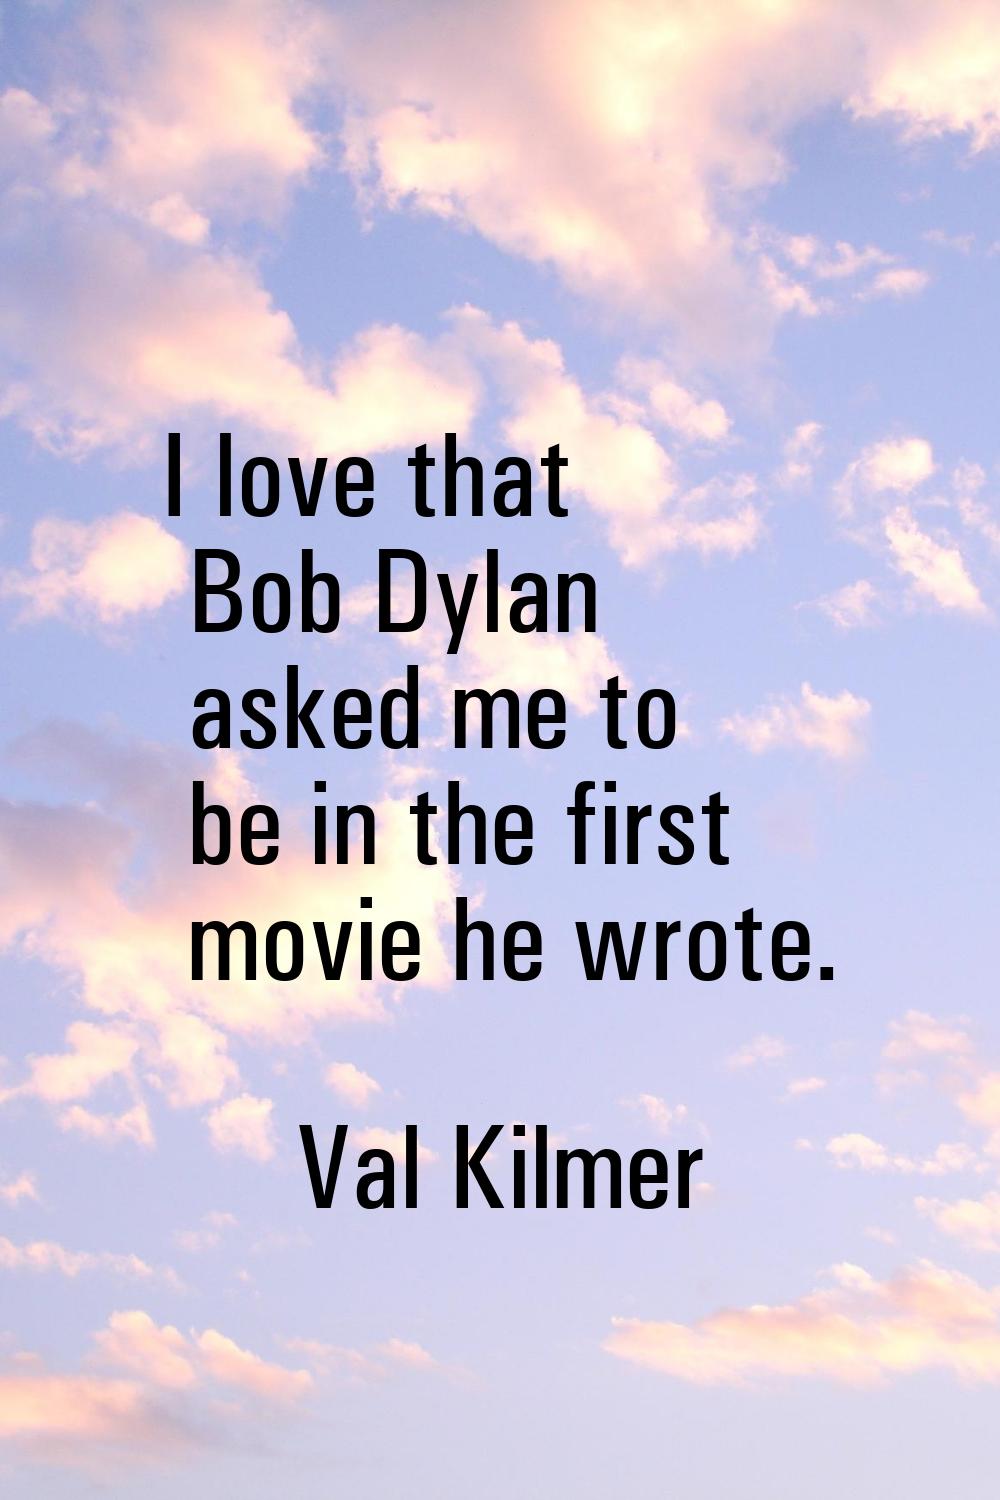 I love that Bob Dylan asked me to be in the first movie he wrote.